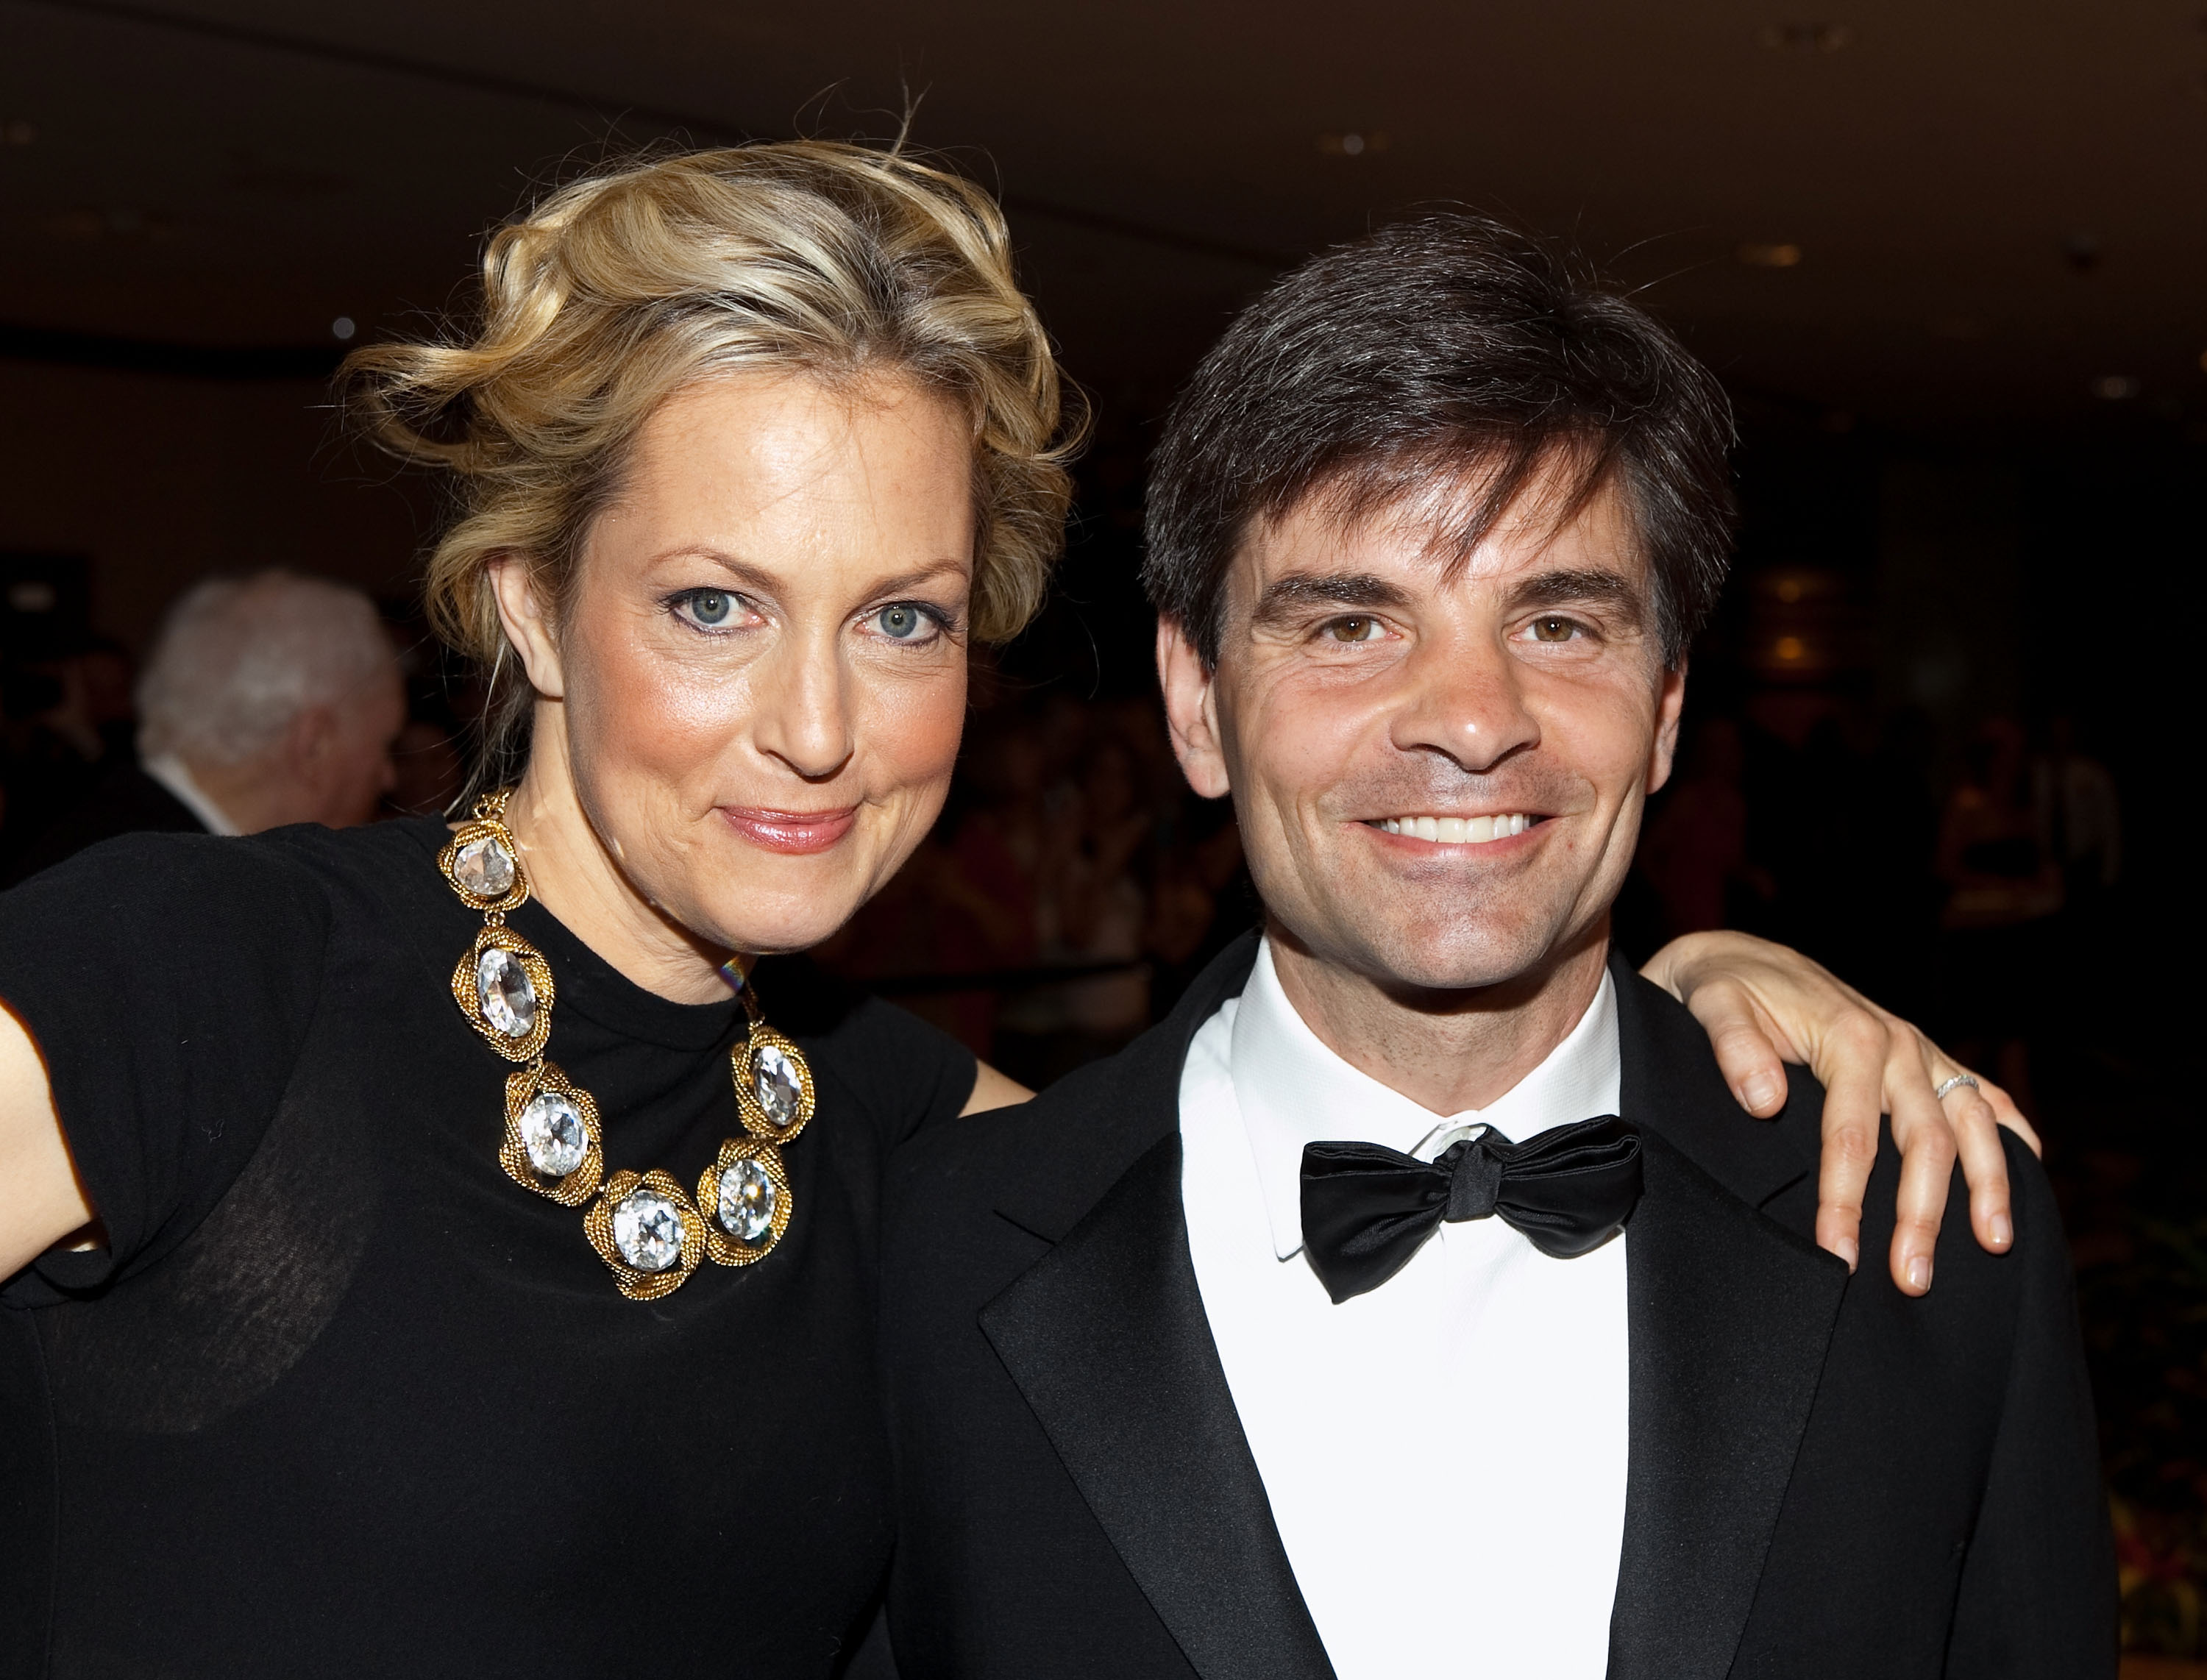 Ali Wentworth and George Stephanopoulos arrive at the White House Correspondents' Association Dinner in Washington, DC, on May 9, 2009. | Source: Getty Images